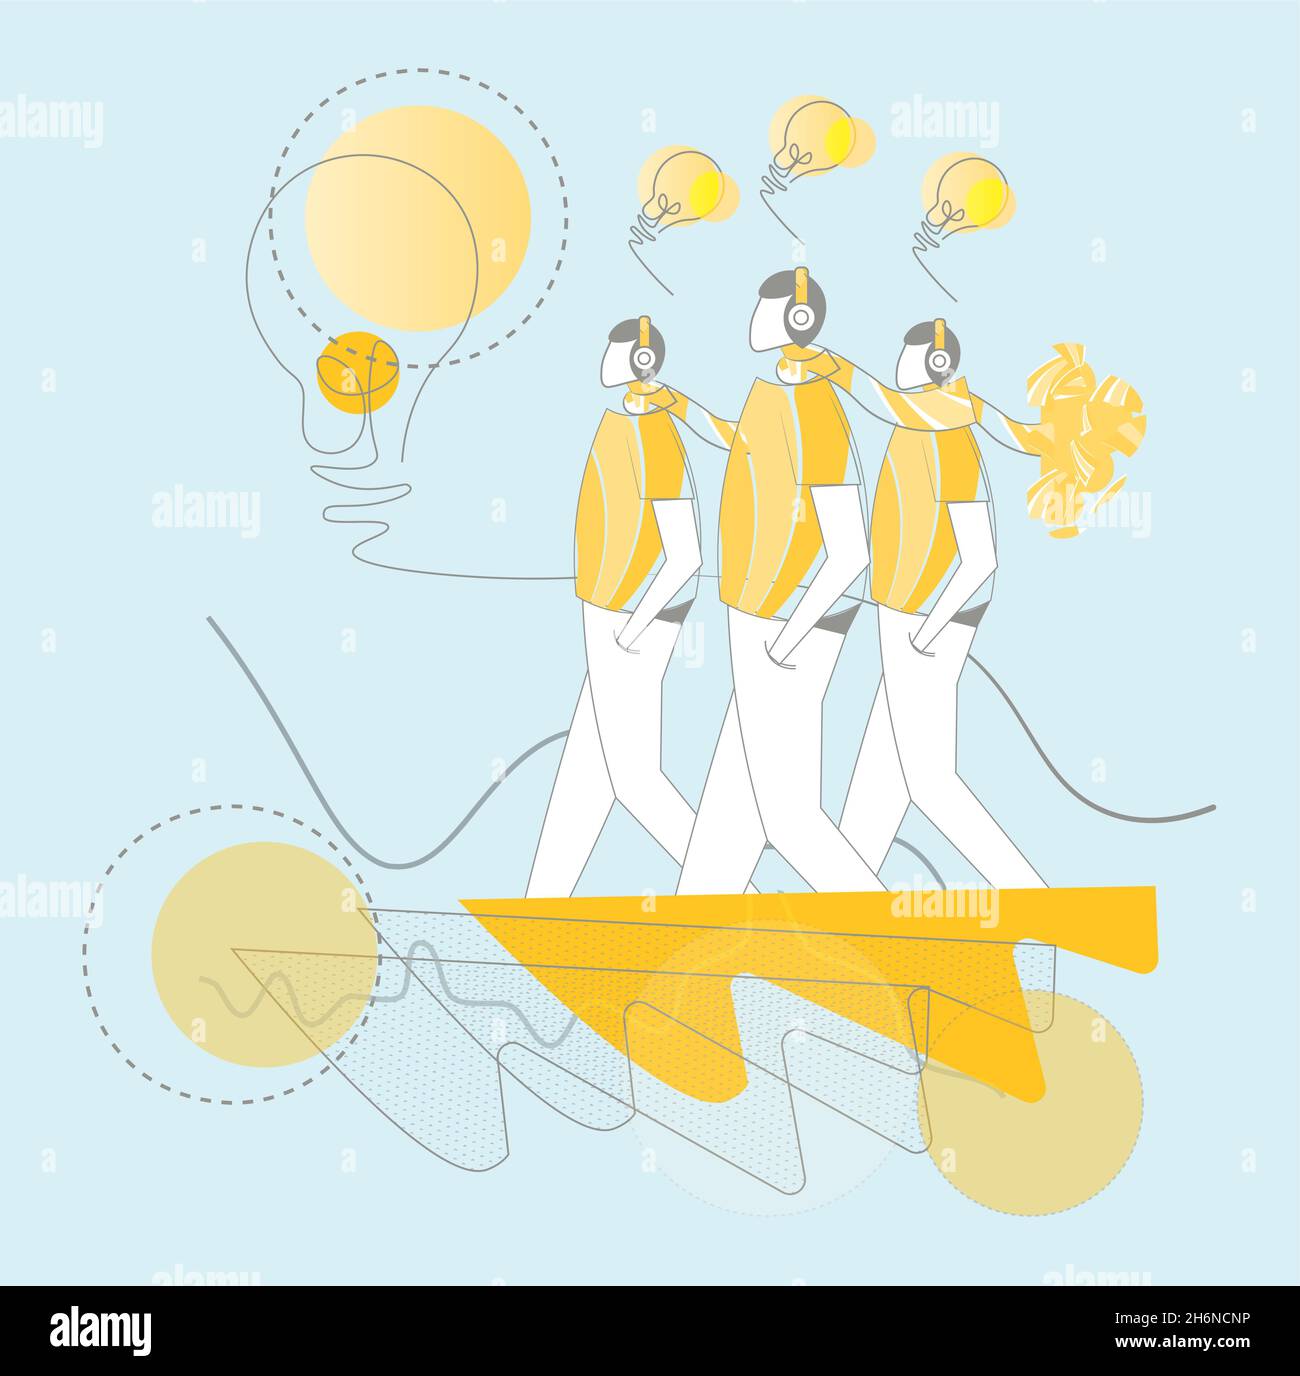 Bright Ideas lightbulb moment concept vector illustration, big idea thinking on a yellow background with clouds and cogs. Stock Vector